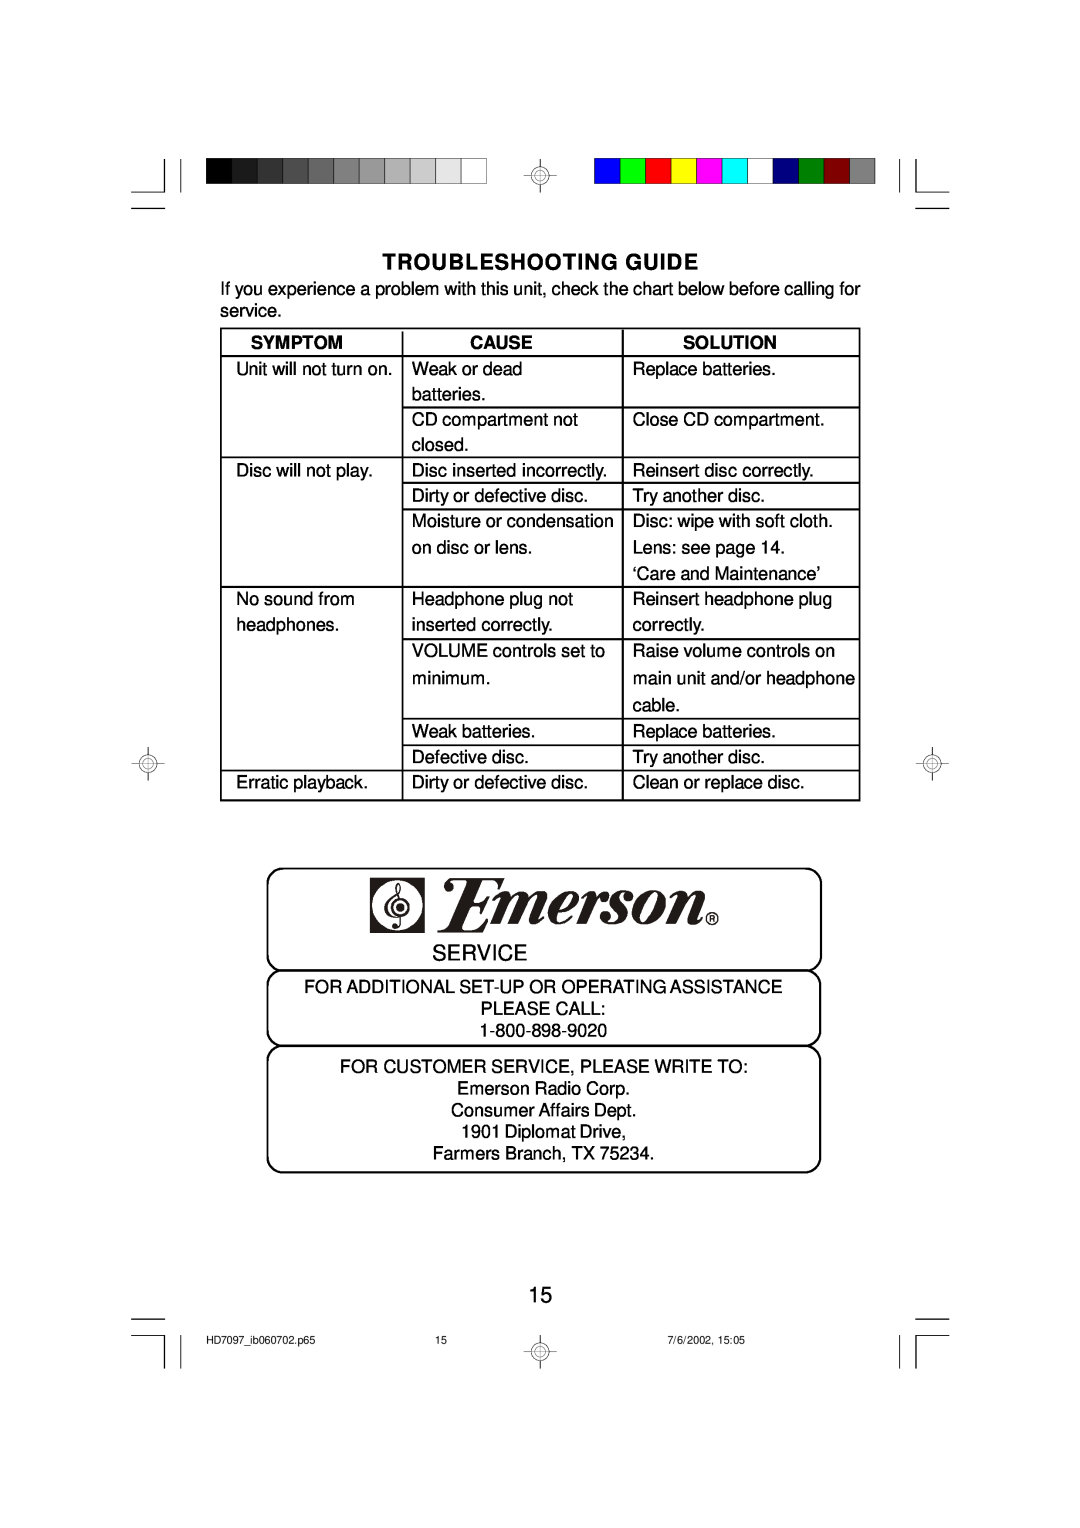 Emerson HD7097 owner manual Troubleshooting Guide, Service, Symptom, Cause, Solution 